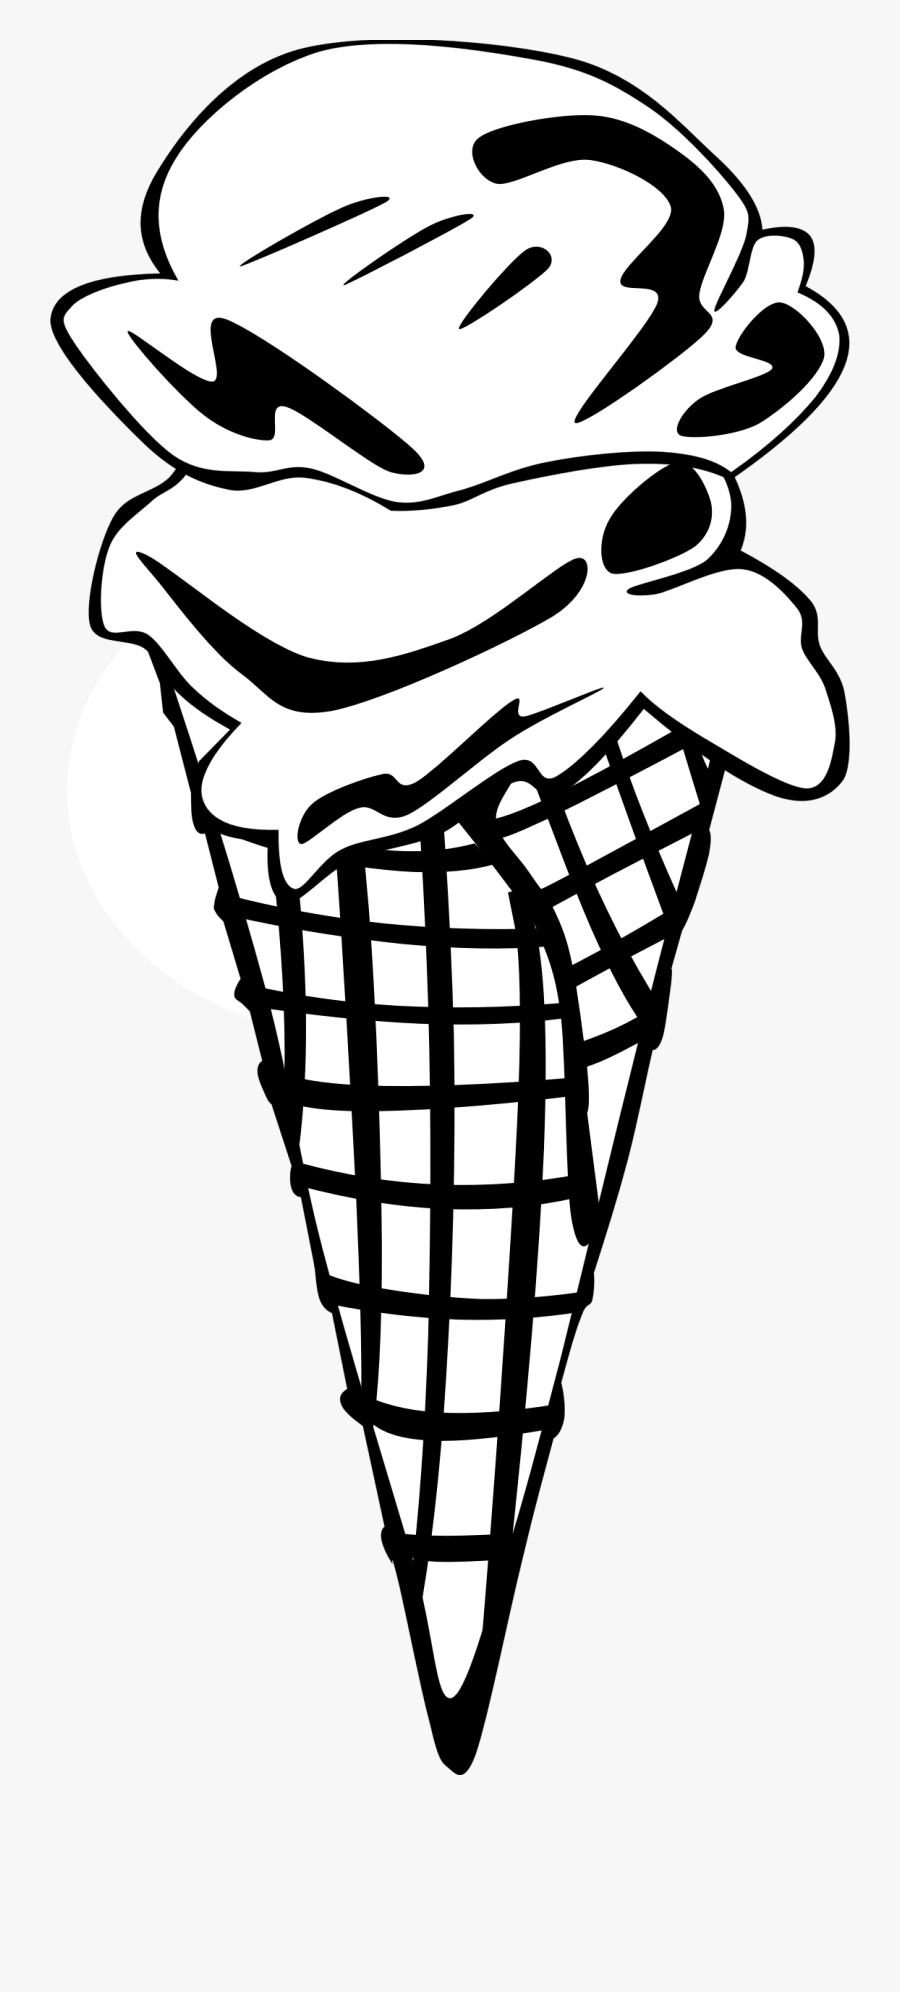 Fast Food, Desserts, Ice Cream Cones, Waffle, Double - Waffle Cone Clipart Black And White, Transparent Clipart